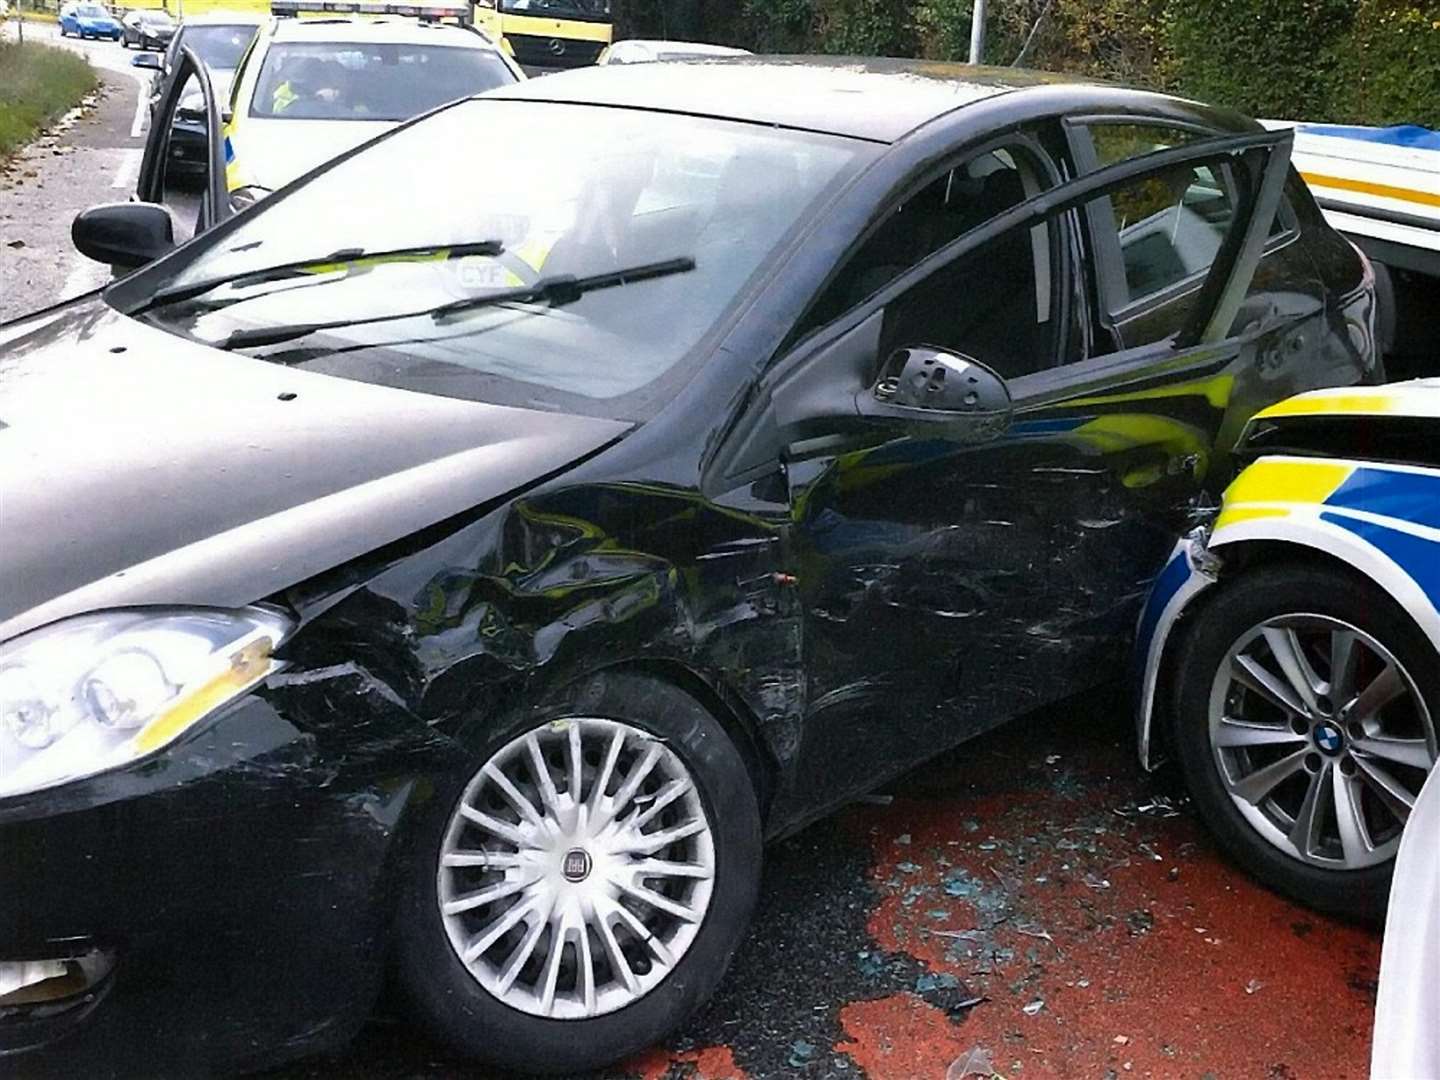 The Fiat after the tactical stop by PC Storey. Picture: Sussex Police/SWNS